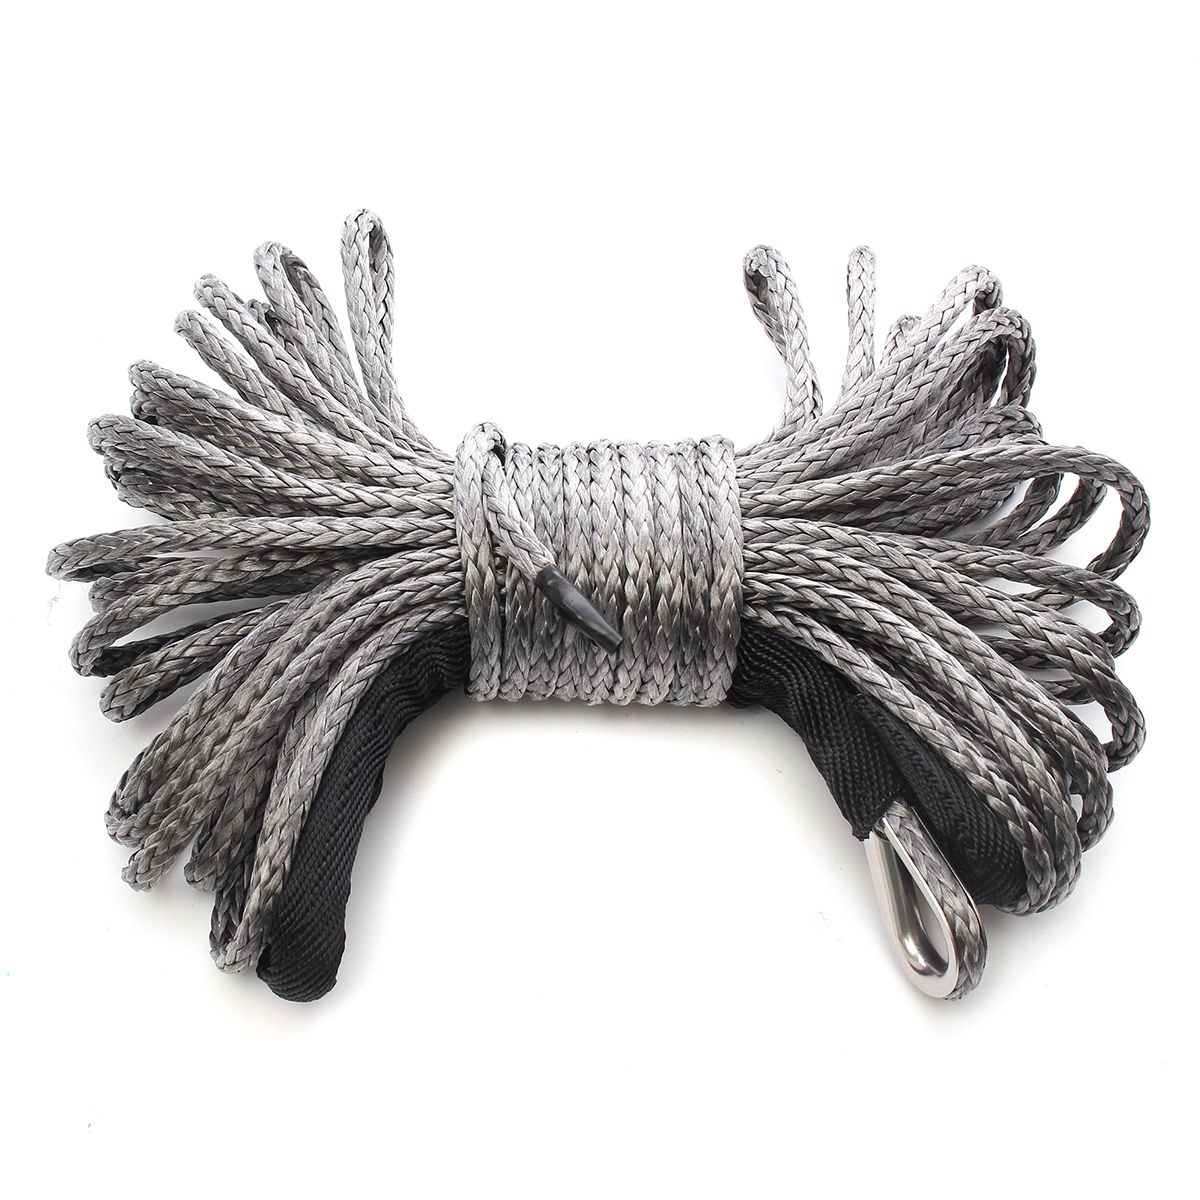 15m-7700LBs-Synthetic-Winch-Line-Cable-Rope-with-Sheath-ATV-UTV-Capstan-Rope-1283527